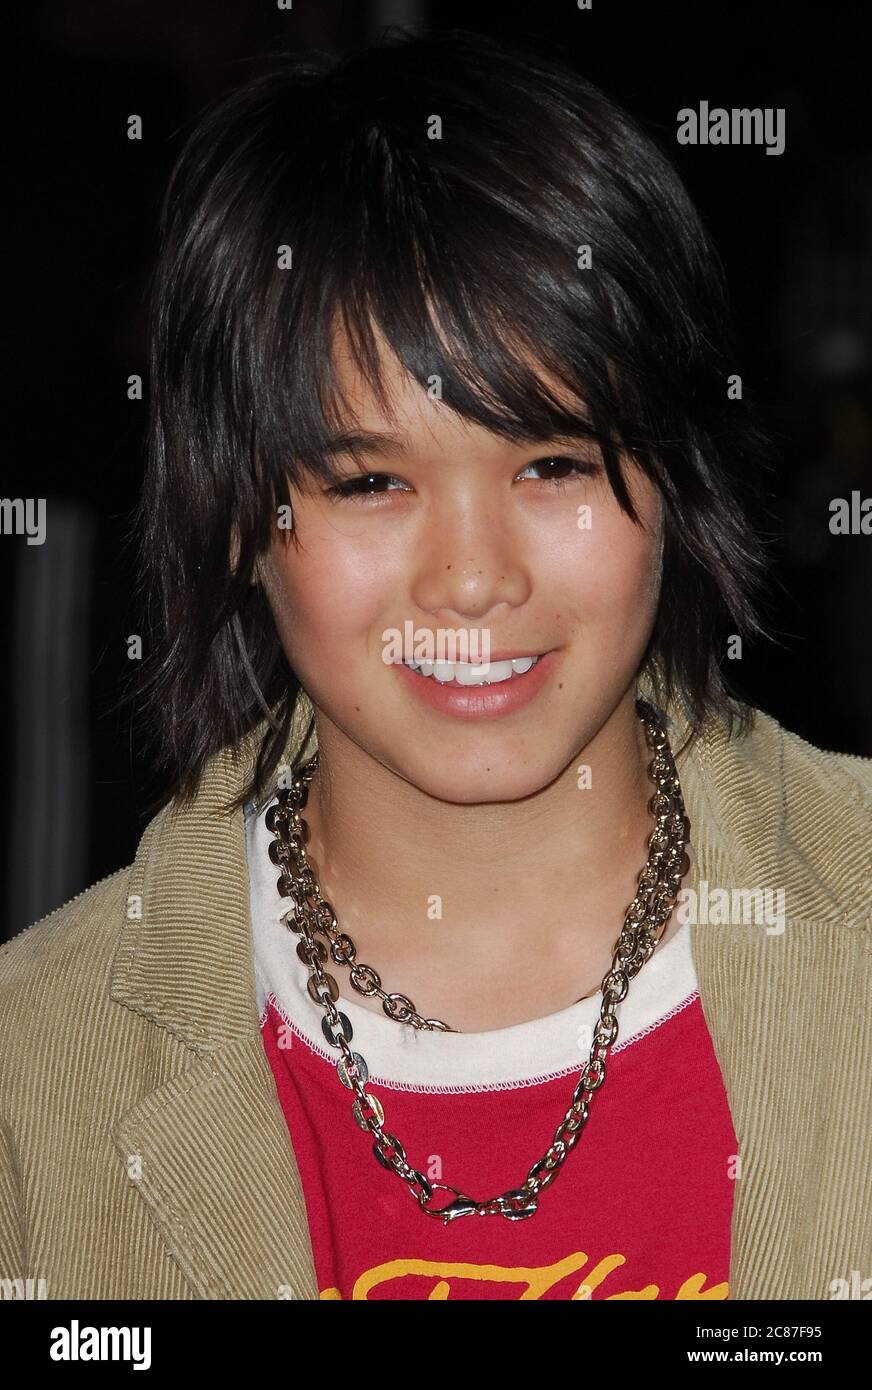 Boo Boo Stewart at the Premiere of 'Somebody Help Me' held at the Grauman's Chinese Theater in Hollywood, CA. The event took place on Thursday, October25, 2007. Photo by: SBM / PictureLux- File Reference # 34006-9806SBMPLX Stock Photo